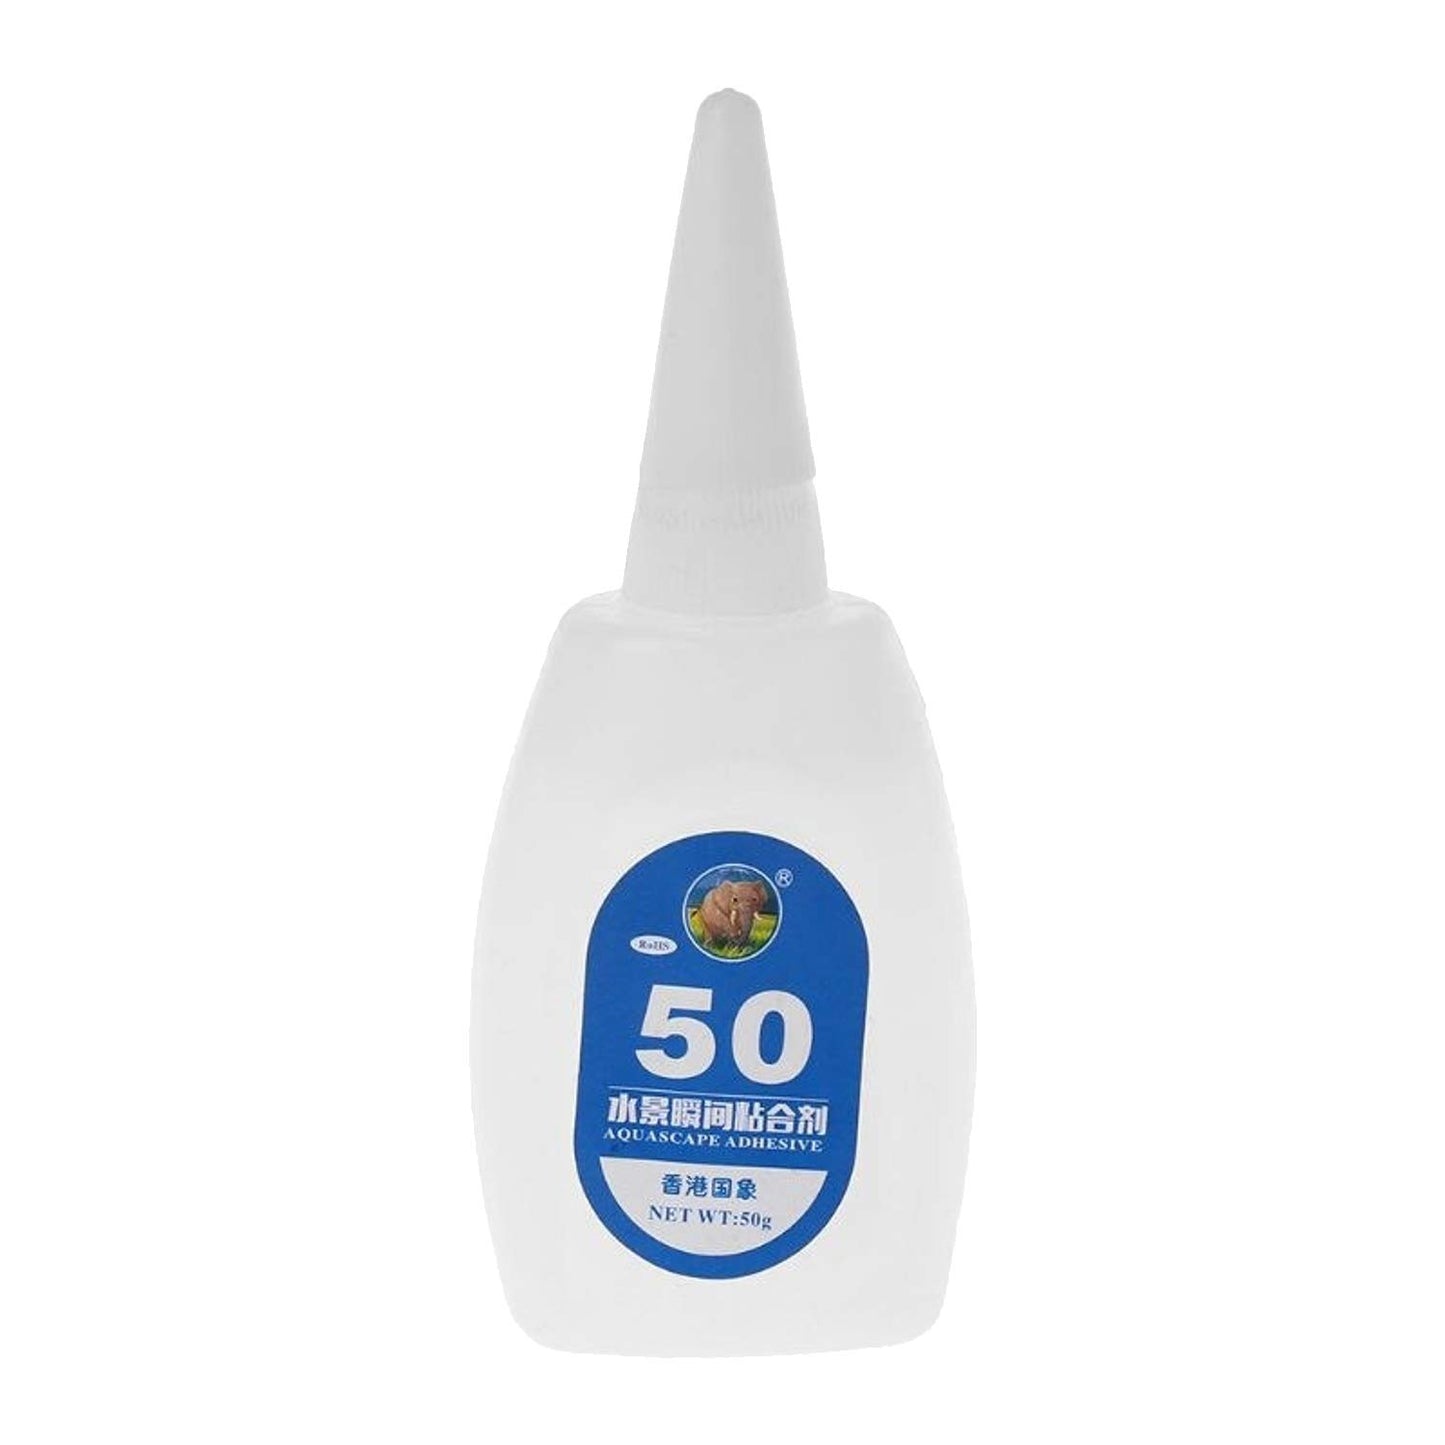 Aquascaping Instant Rock & Wood Glue 50ml and 100ml